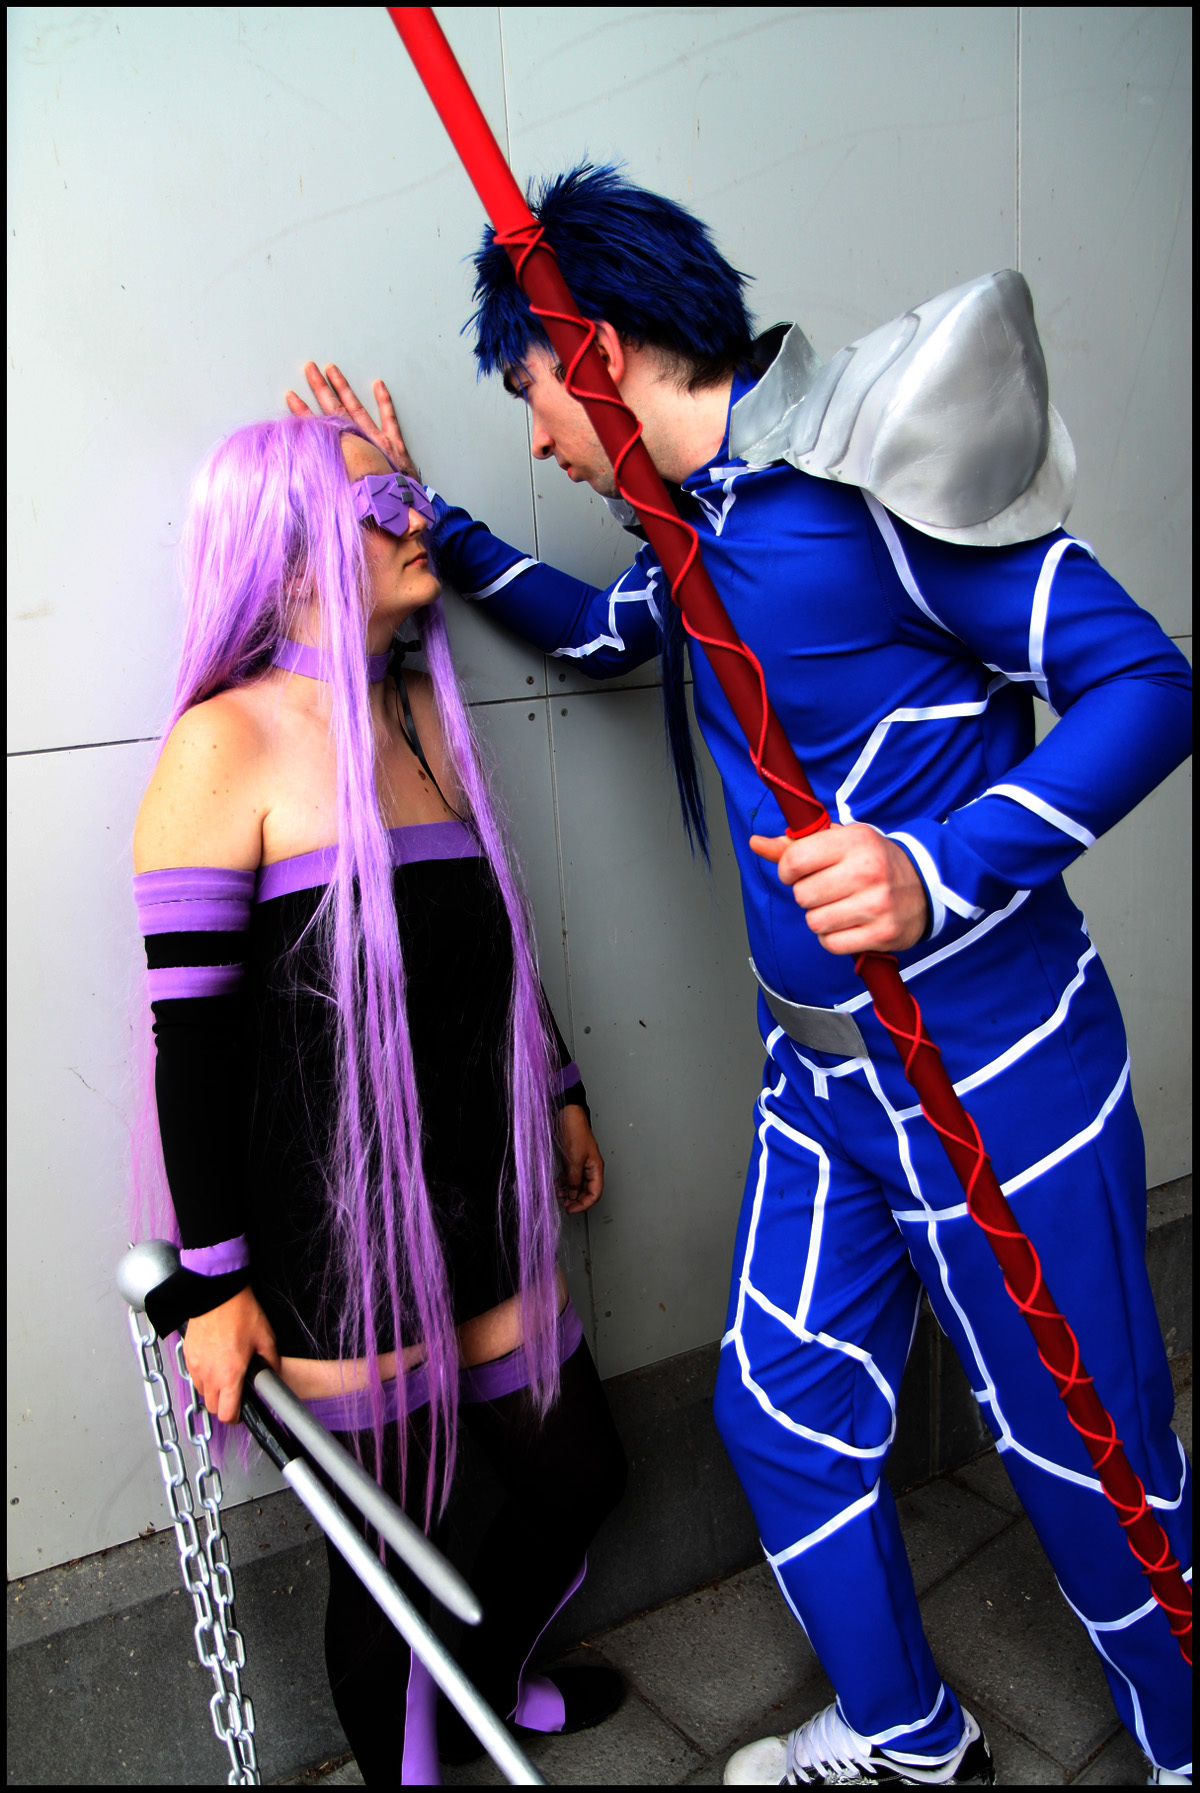 Cospix.net photo featuring MDACosplay